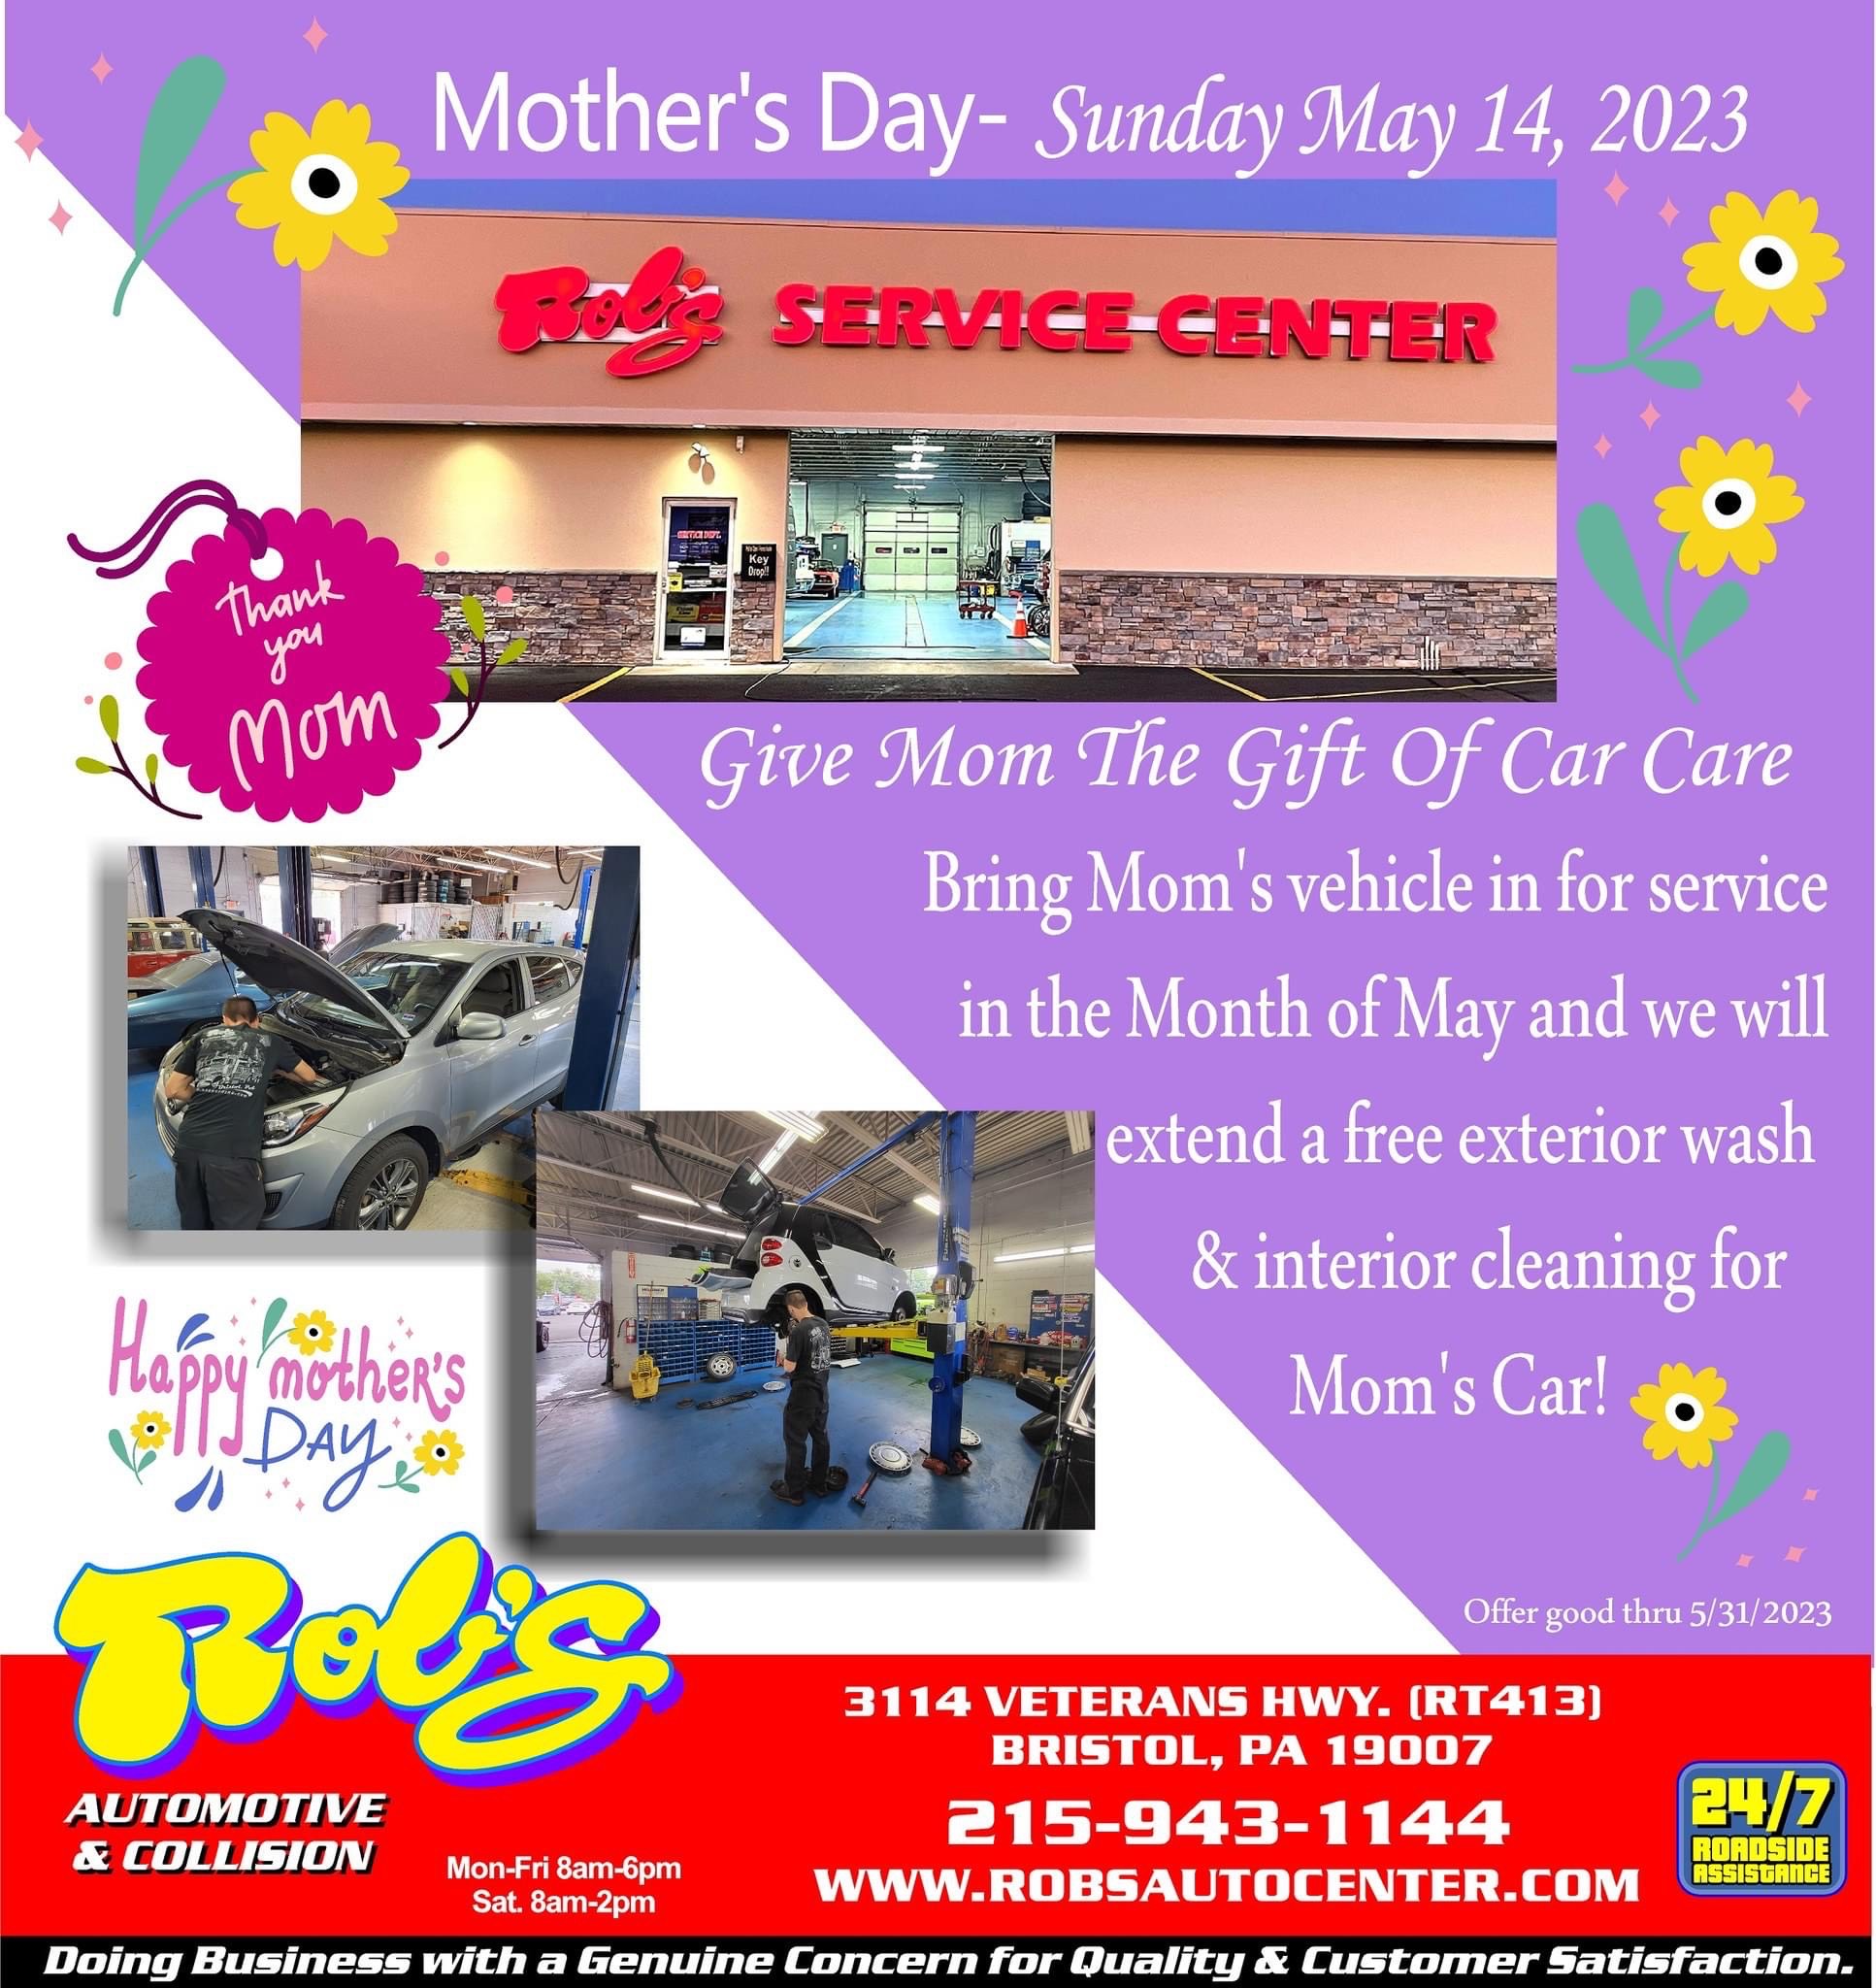 Give Mom the gift of car care. Bring Mom's vehicle in for service in the month of May and we will extend a free exterior wash & interior cleaning for Mom's car!